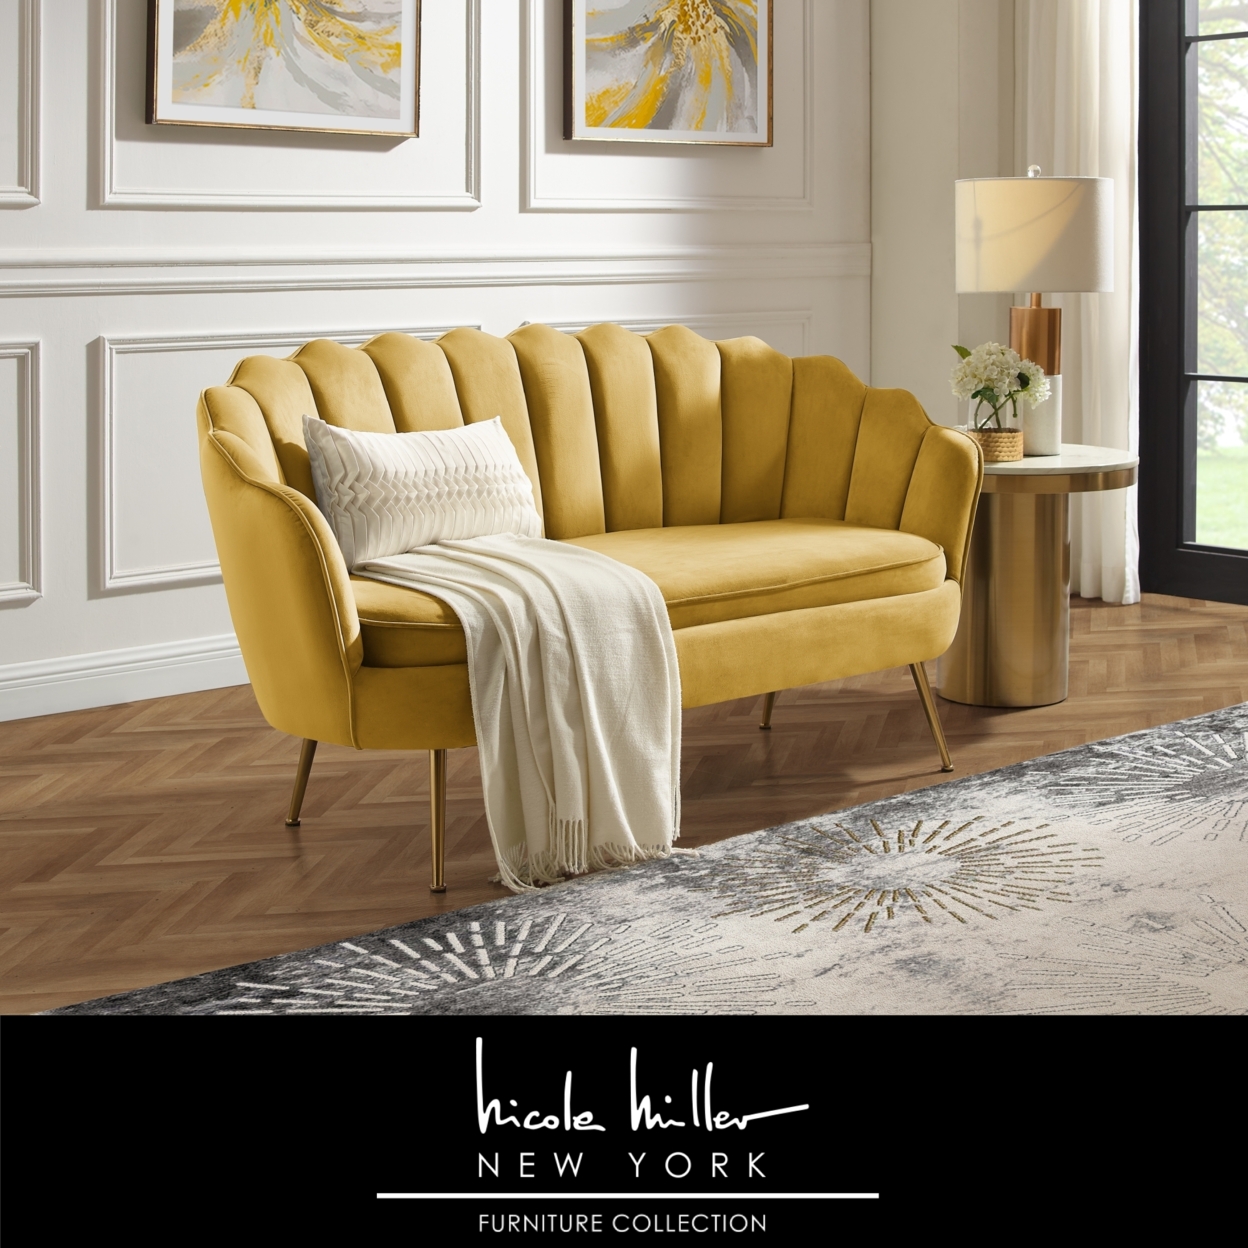 Dallin Loveseat - Upholstered Channel Tufted, Scalloped Edges, Tapered Polished Gold Legs - Light Blue